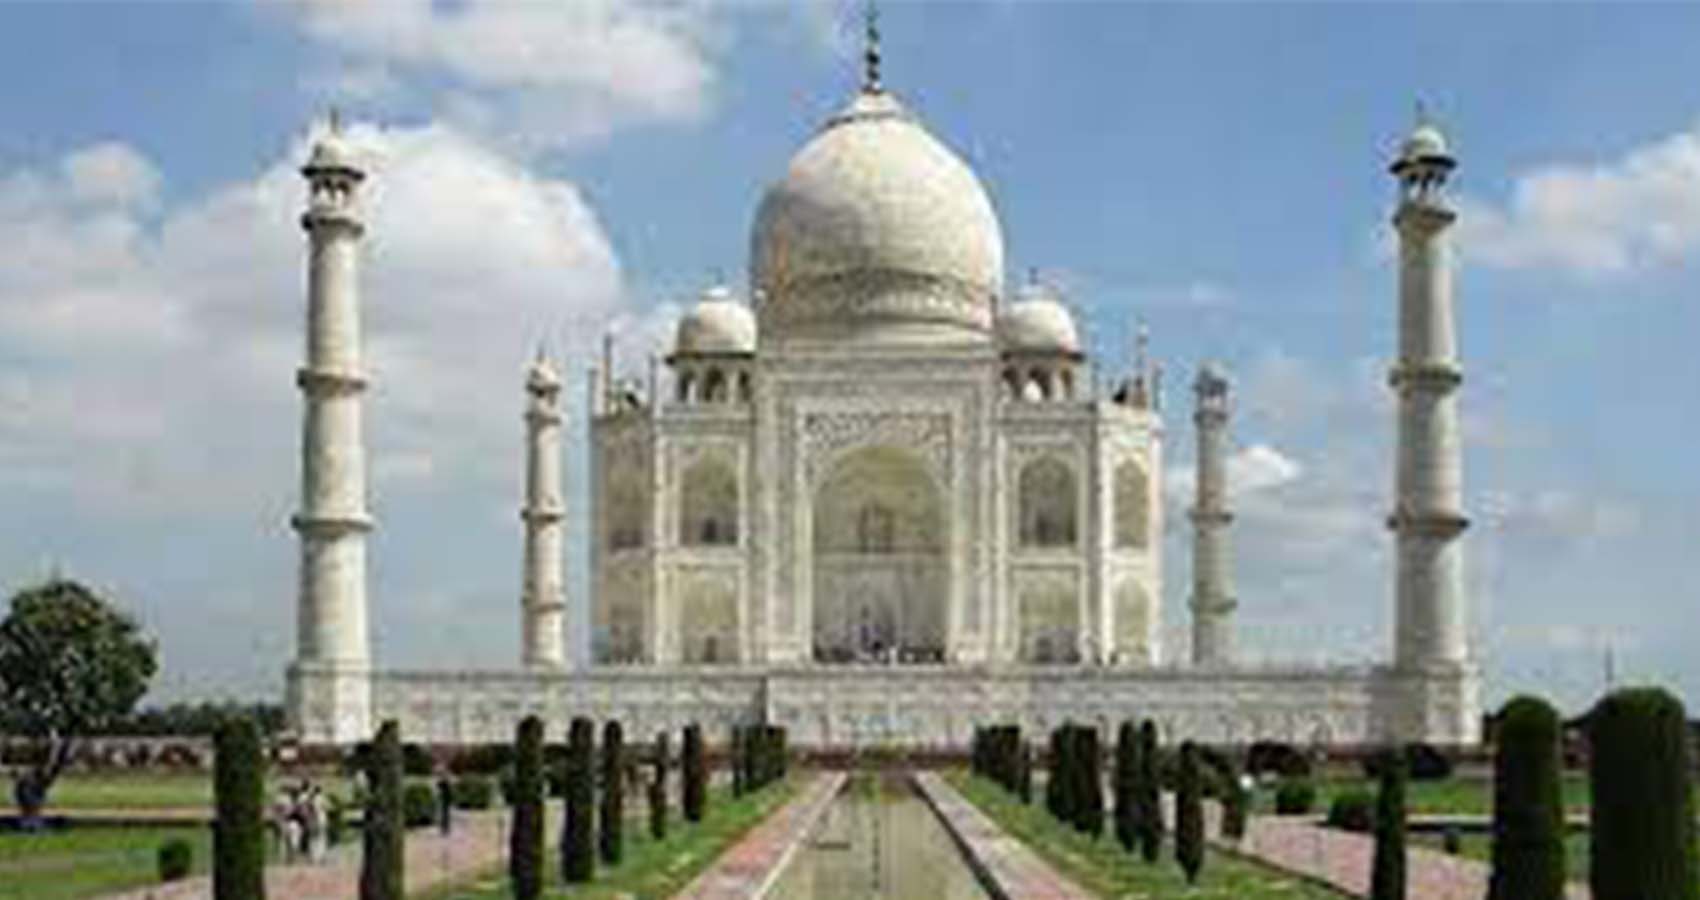 Petition In Indian Court To Search Taj Mahal For Hindu Idols And Inscriptions